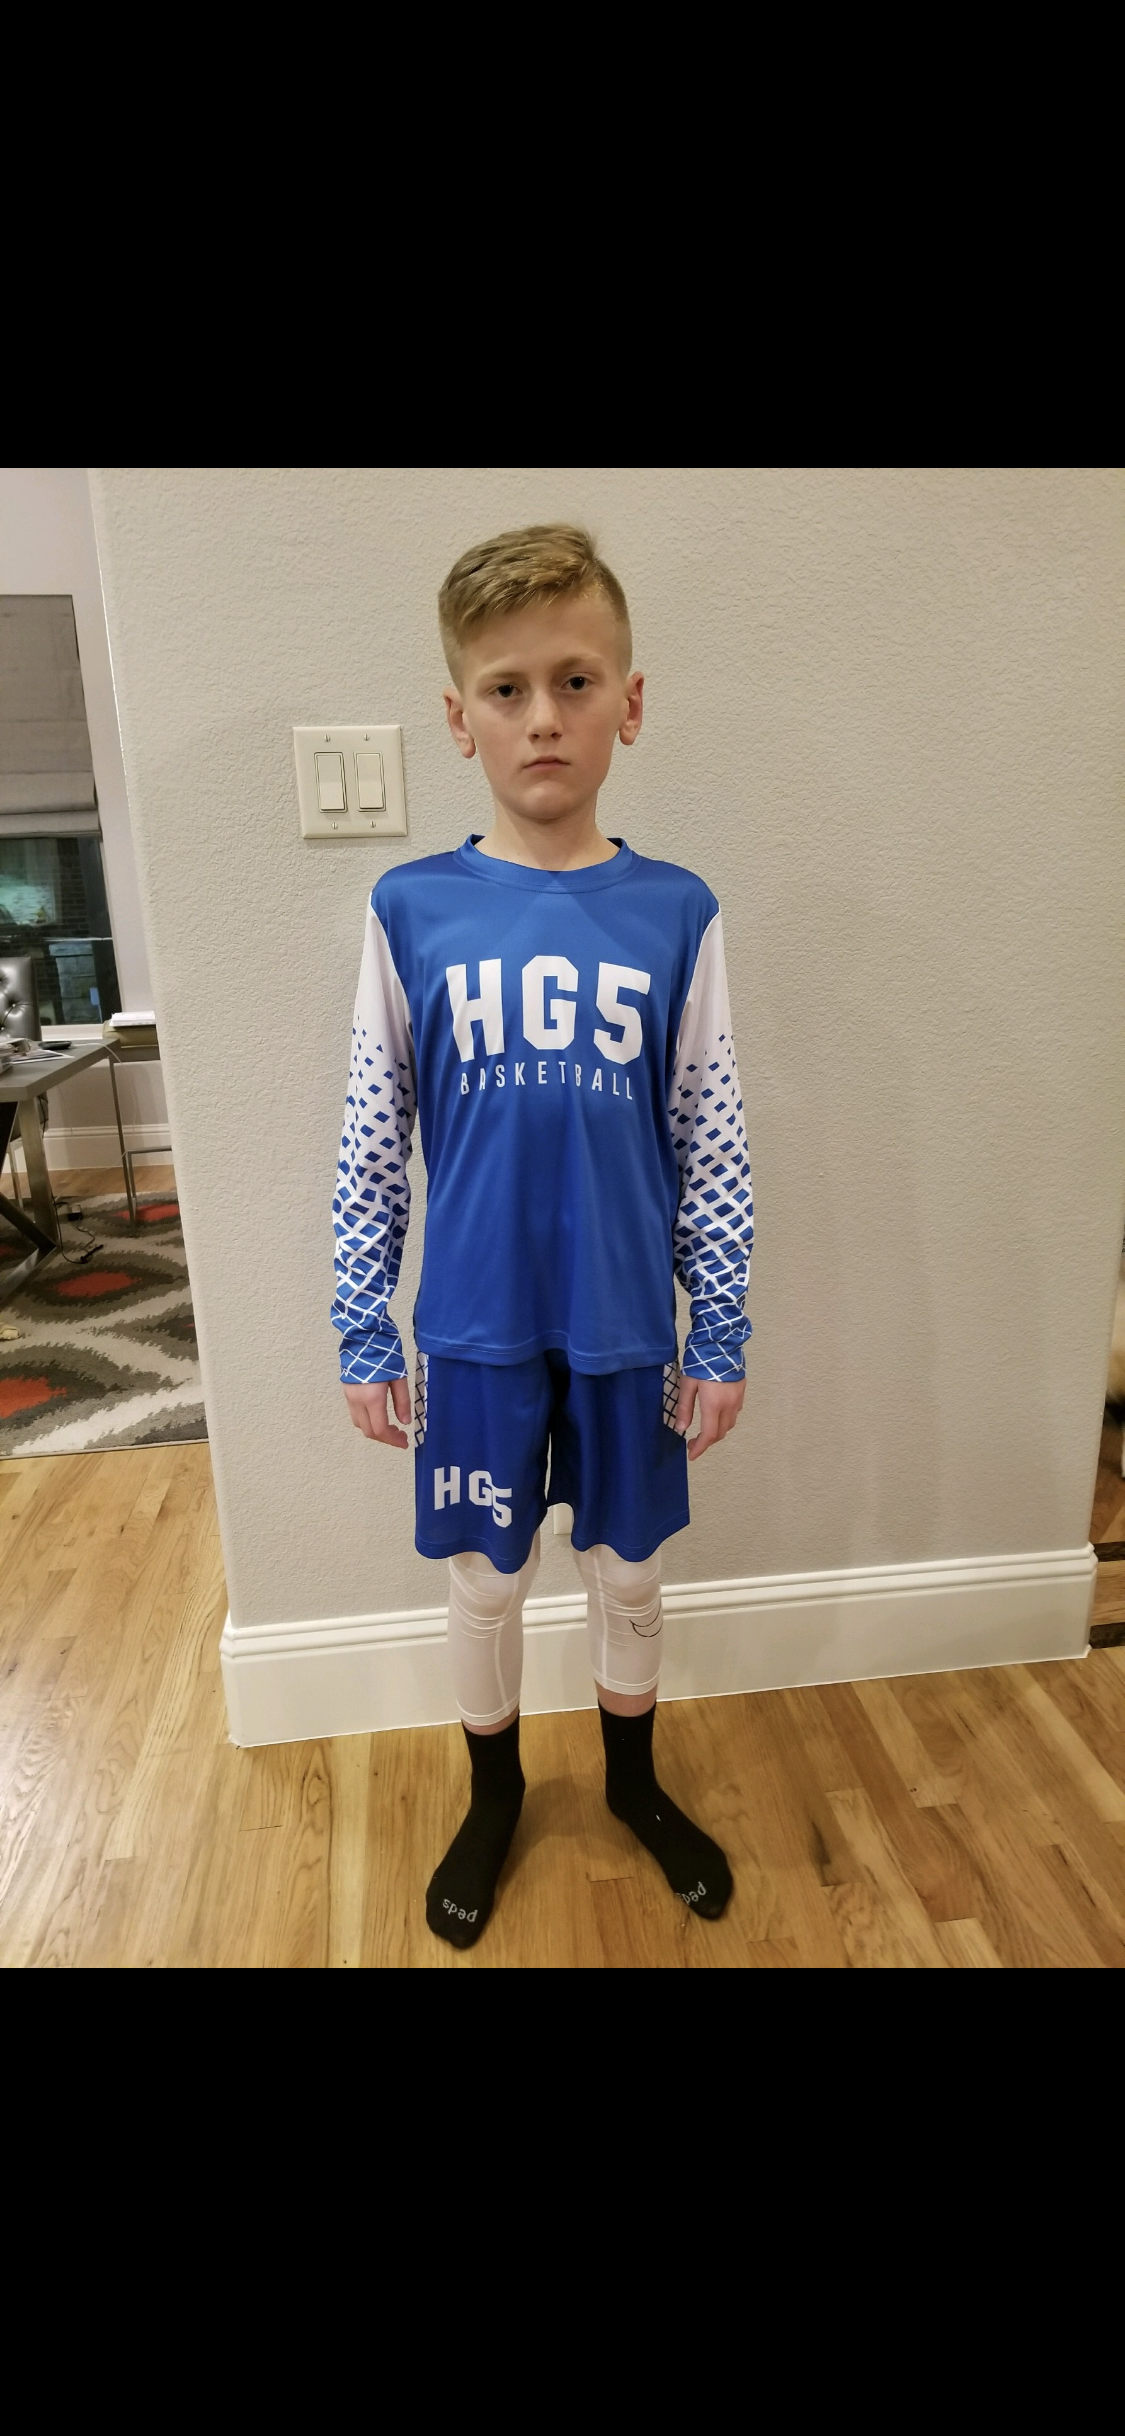 HG5 Blue and White Basketball Jersey and Short